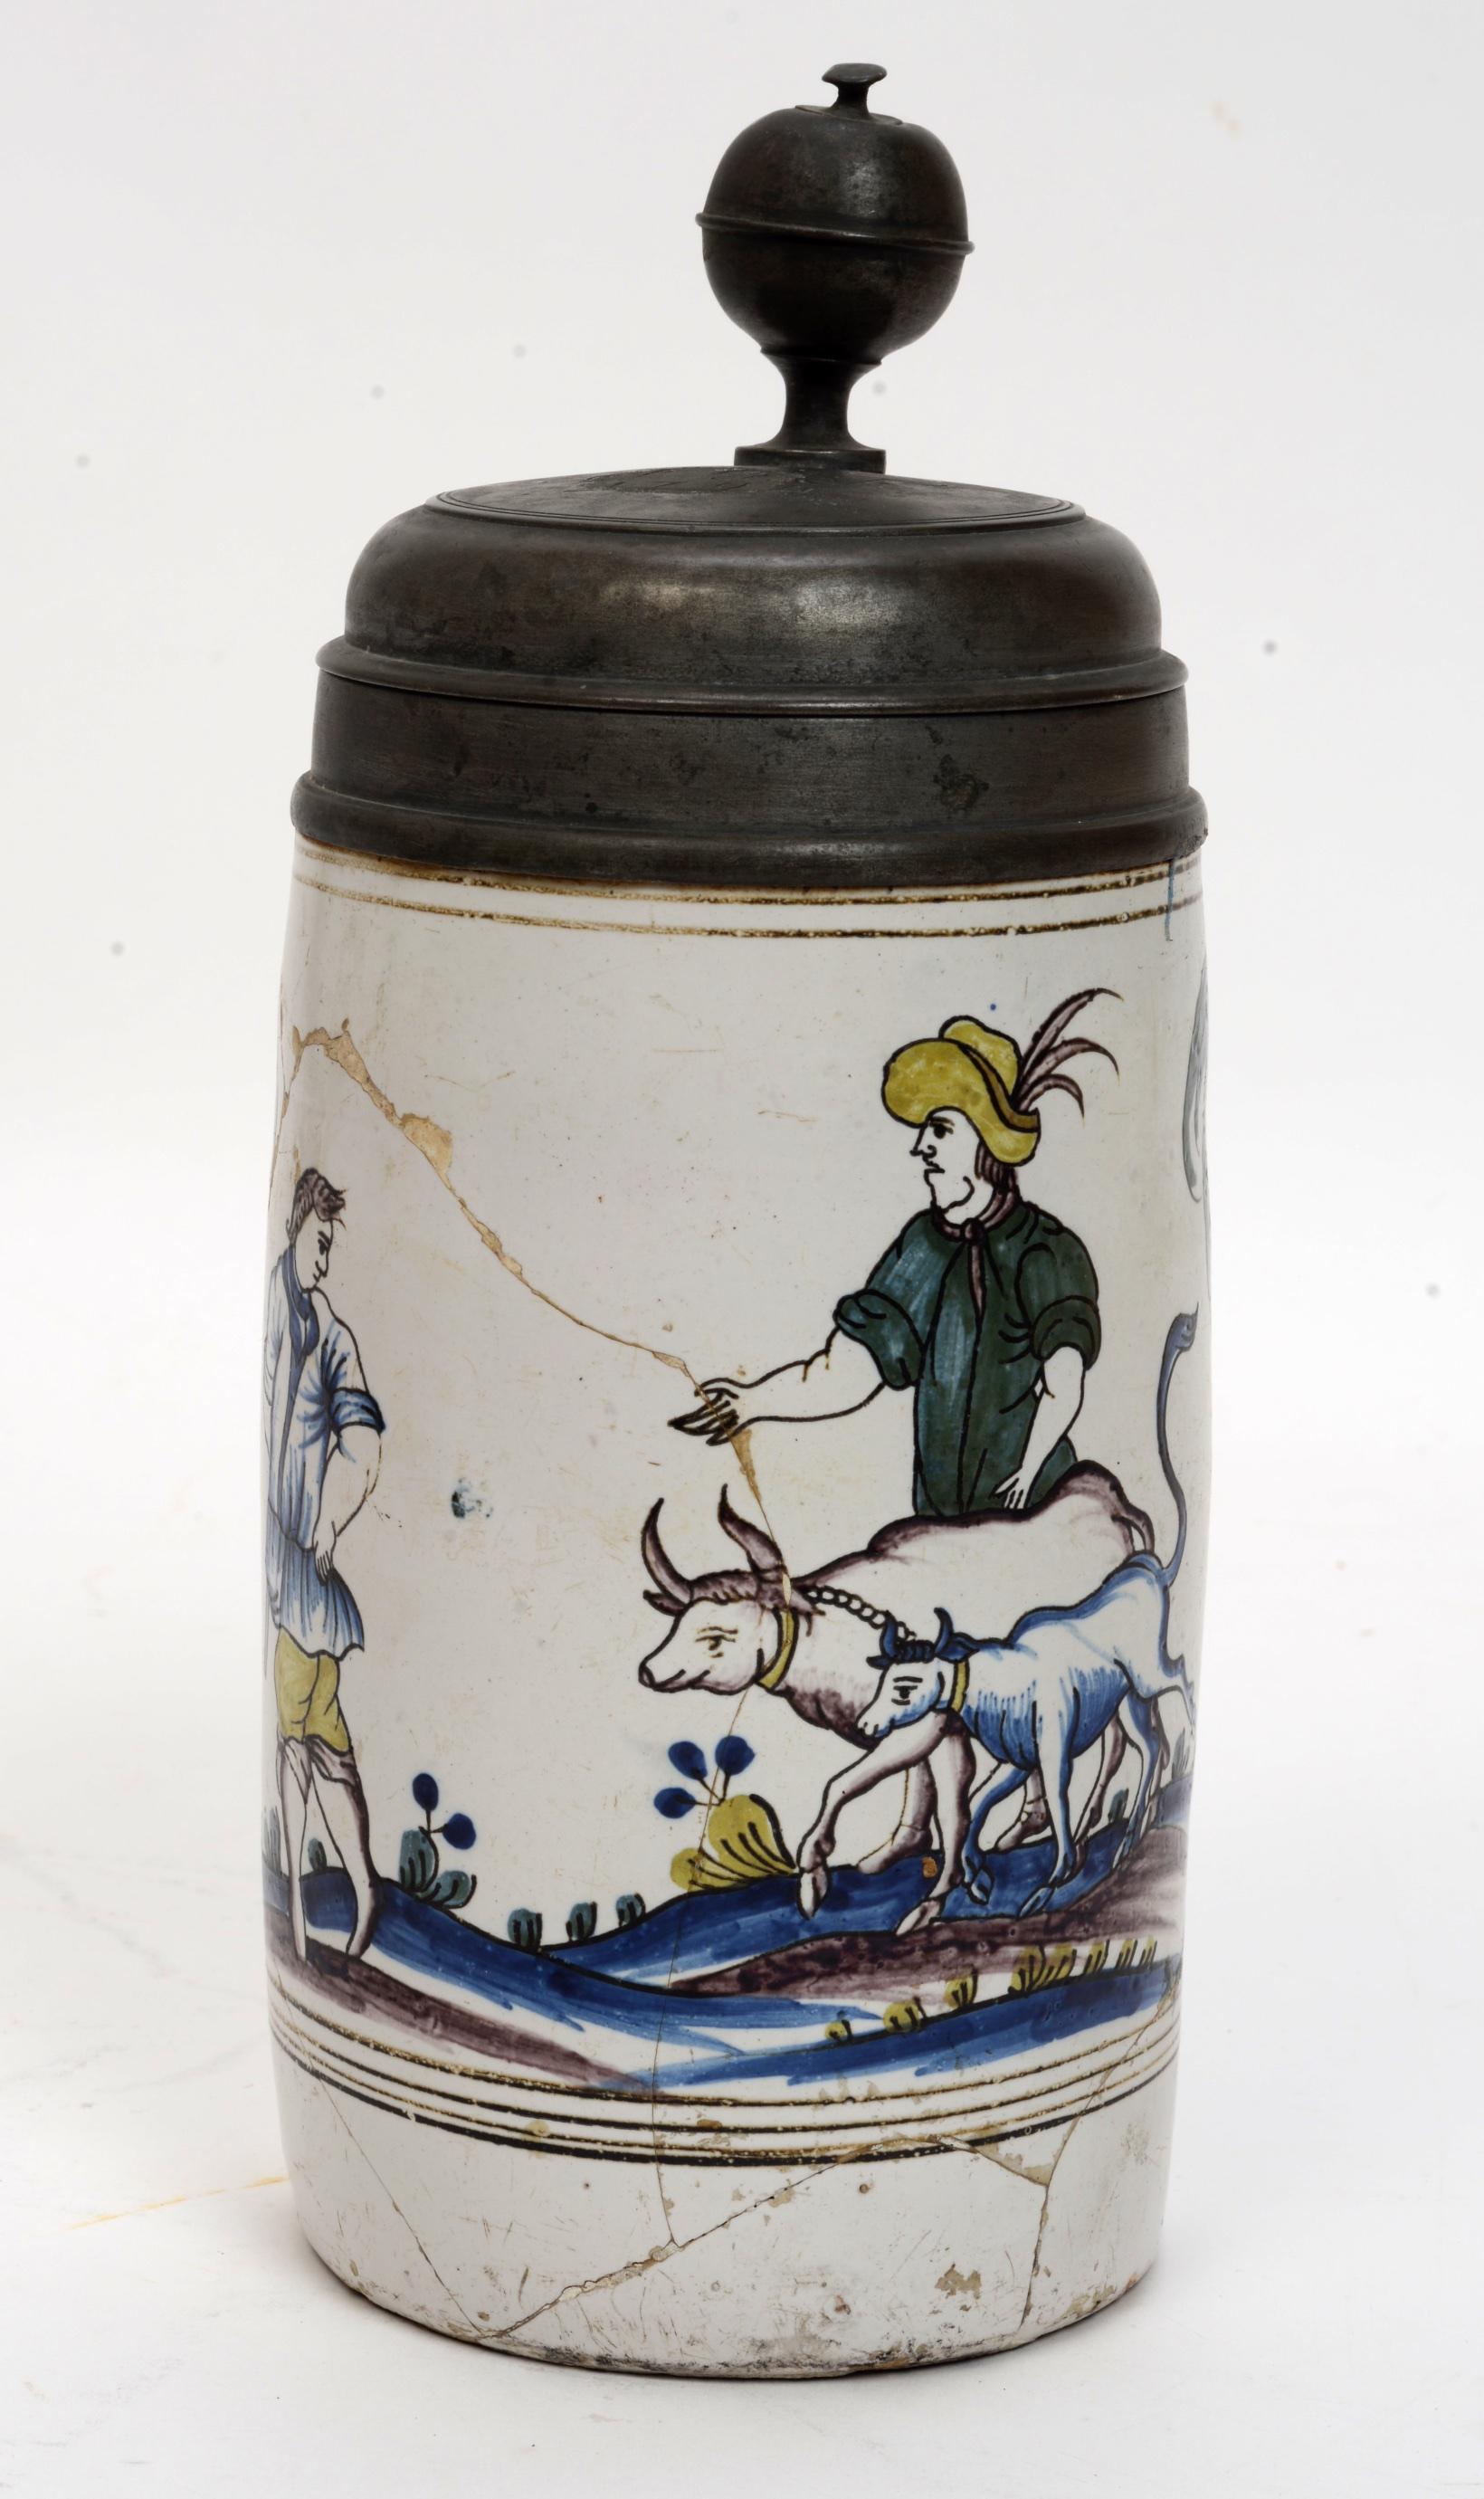 Hand-Painted 18th Century German Pewter Mounted Faience Stein Dated 1794 and Initaled